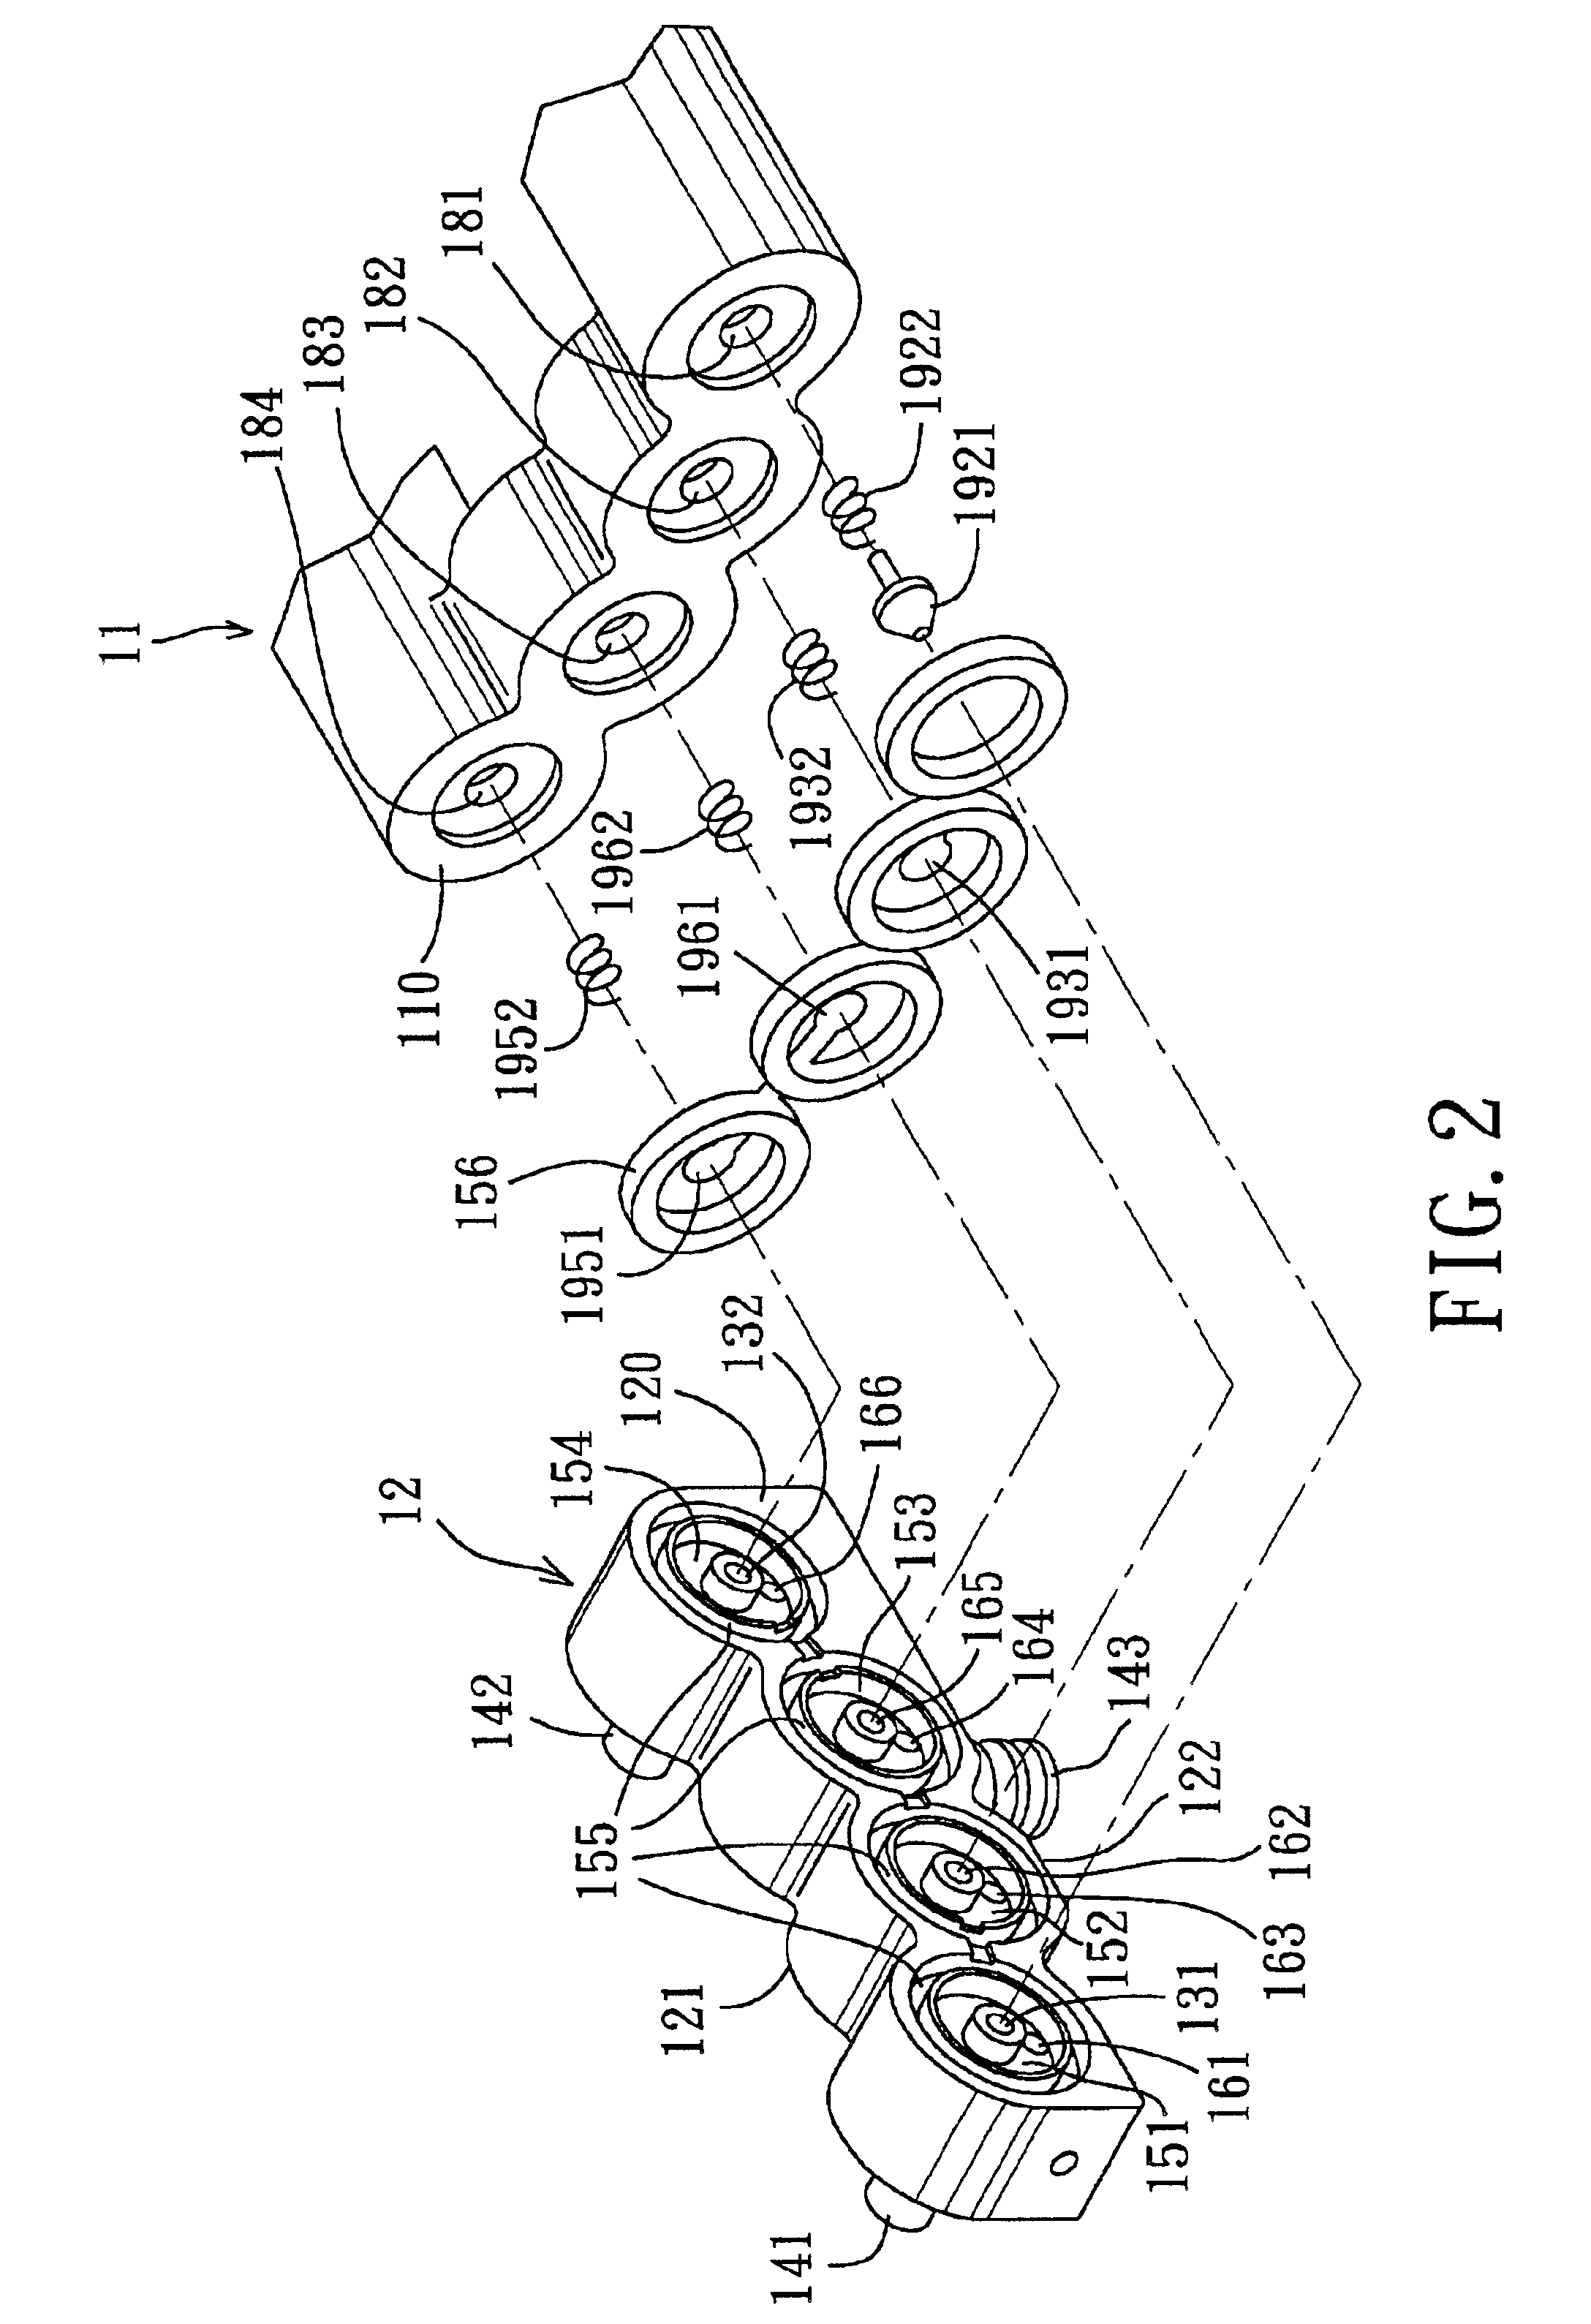 Device for generating a jet stream of air entrained water